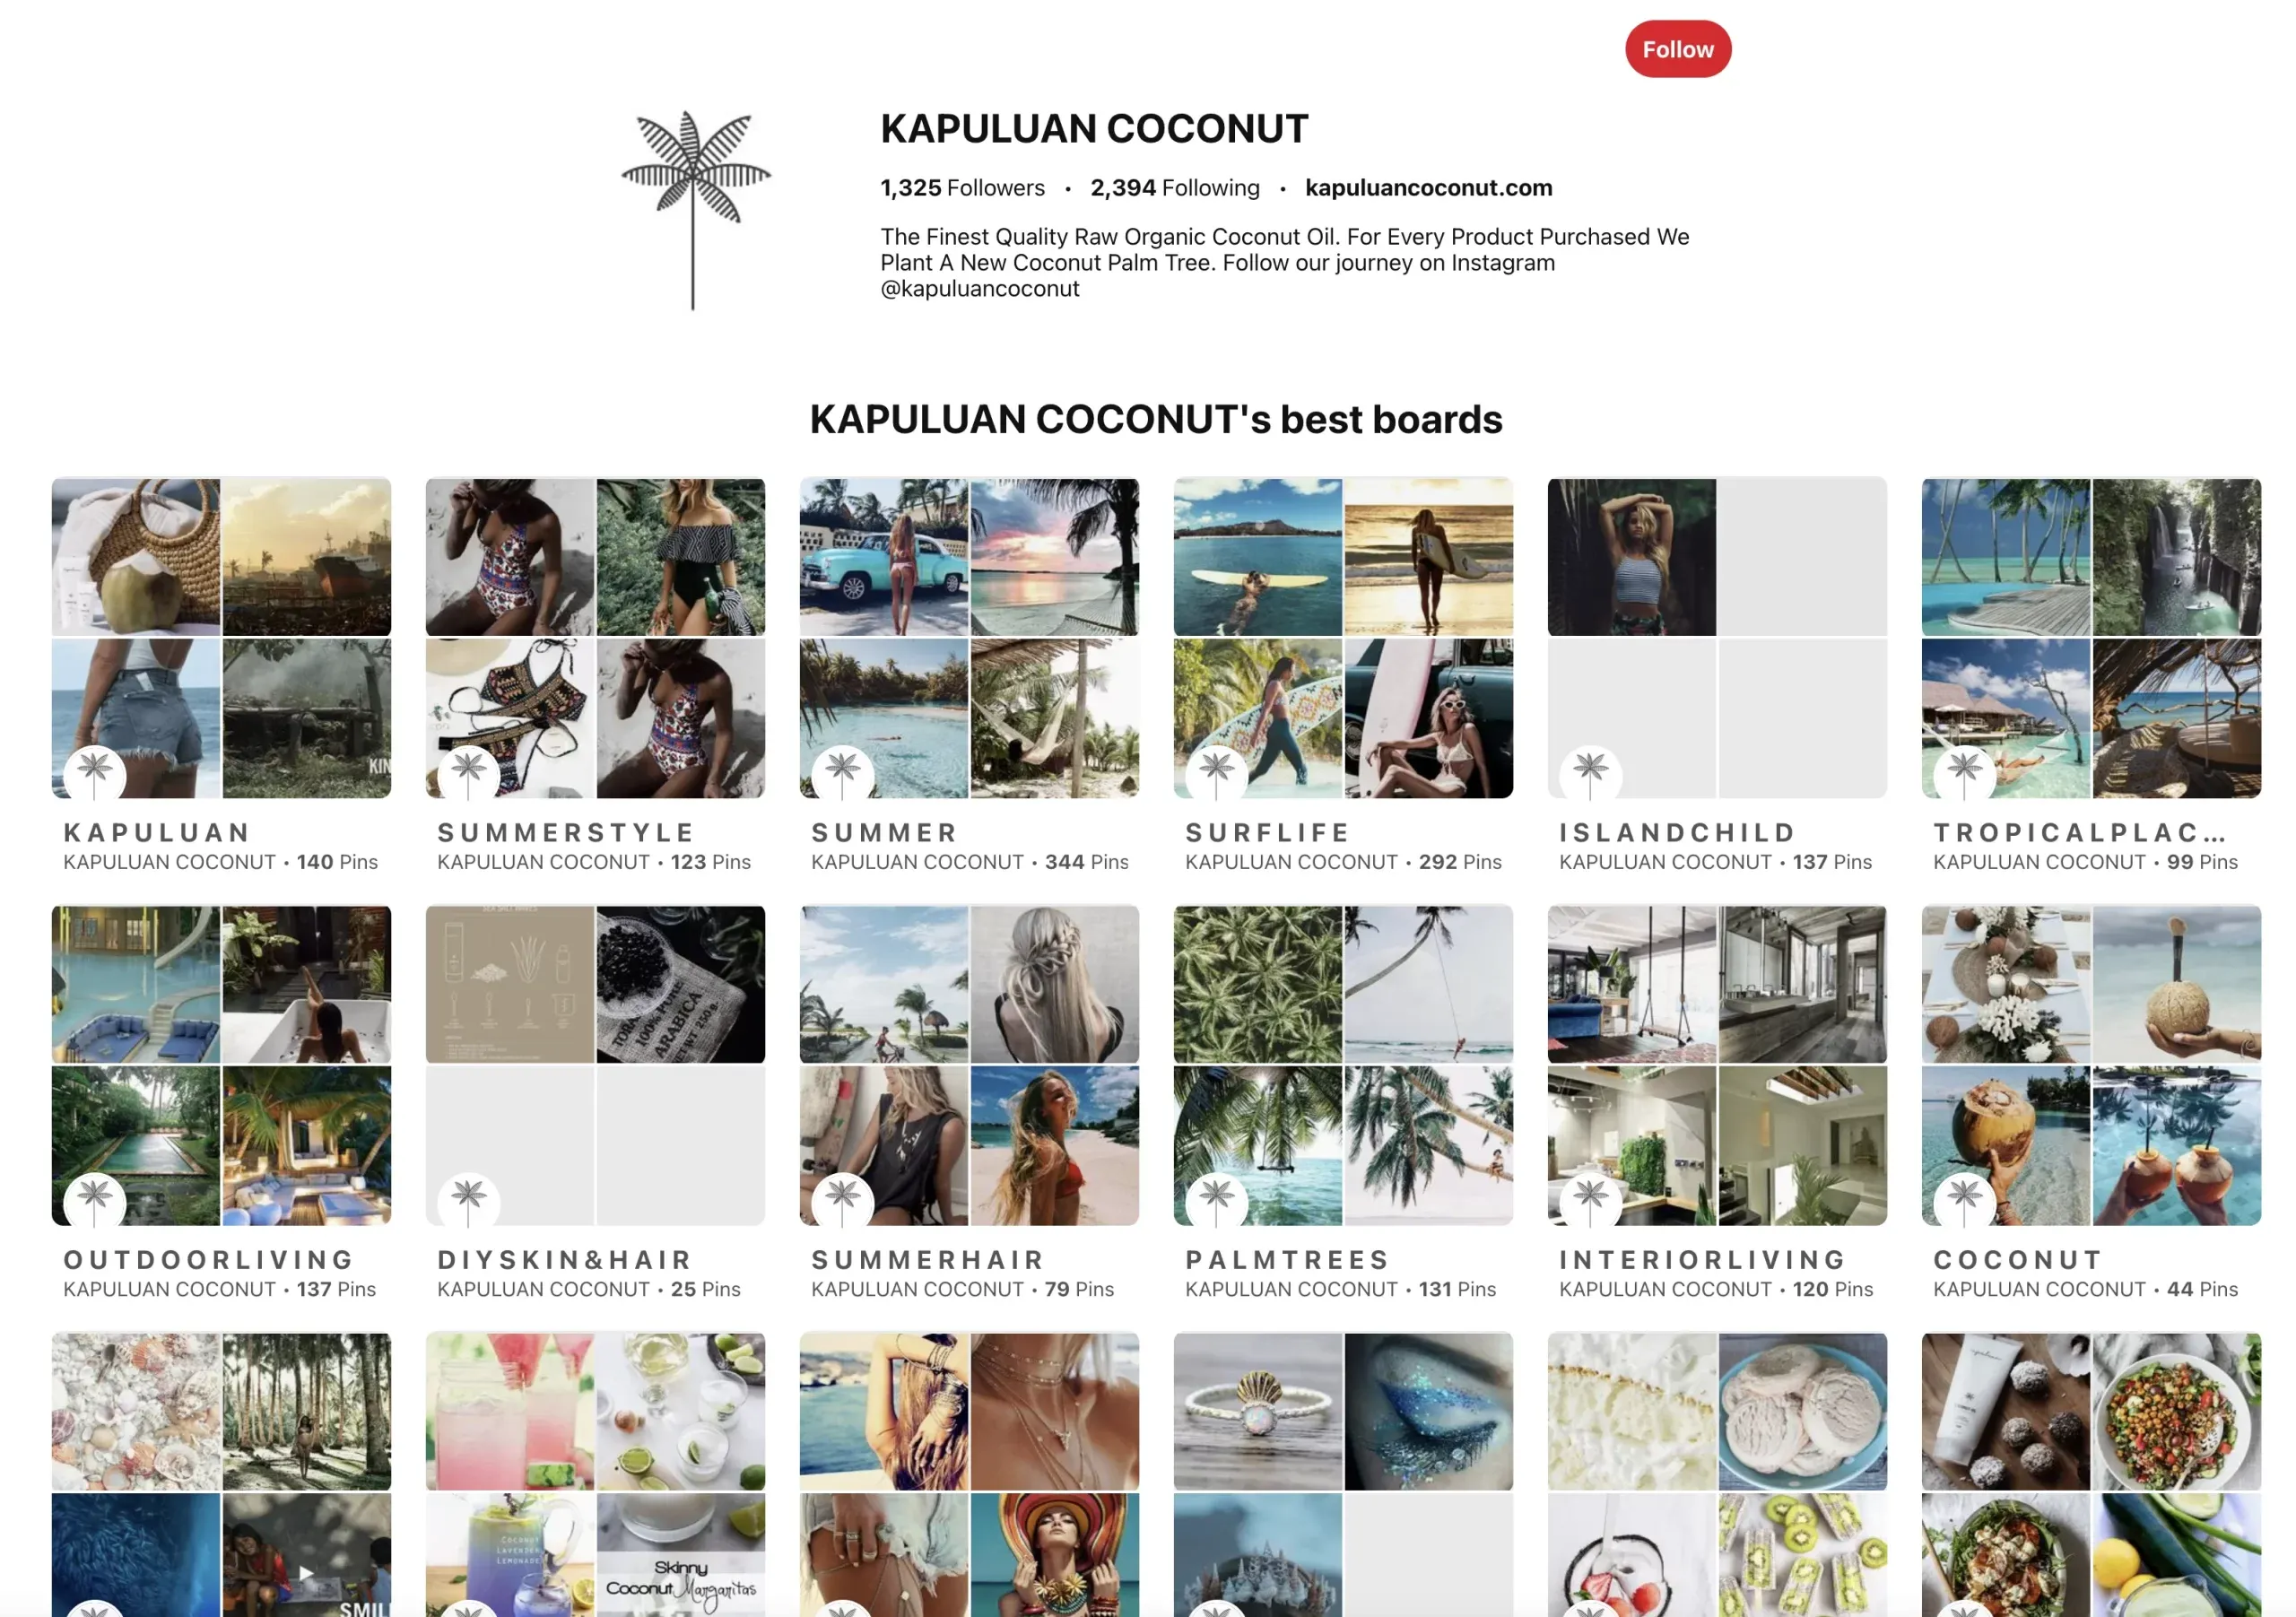 Screenshot of a Pinterest profile for "KAPULUAN COCONUT" featuring various boards with coconut-related themes. The page shows an account with 1,325 followers and 2,934 following. Each board is filled with images focused on different coconut and tropical lifestyle themes.